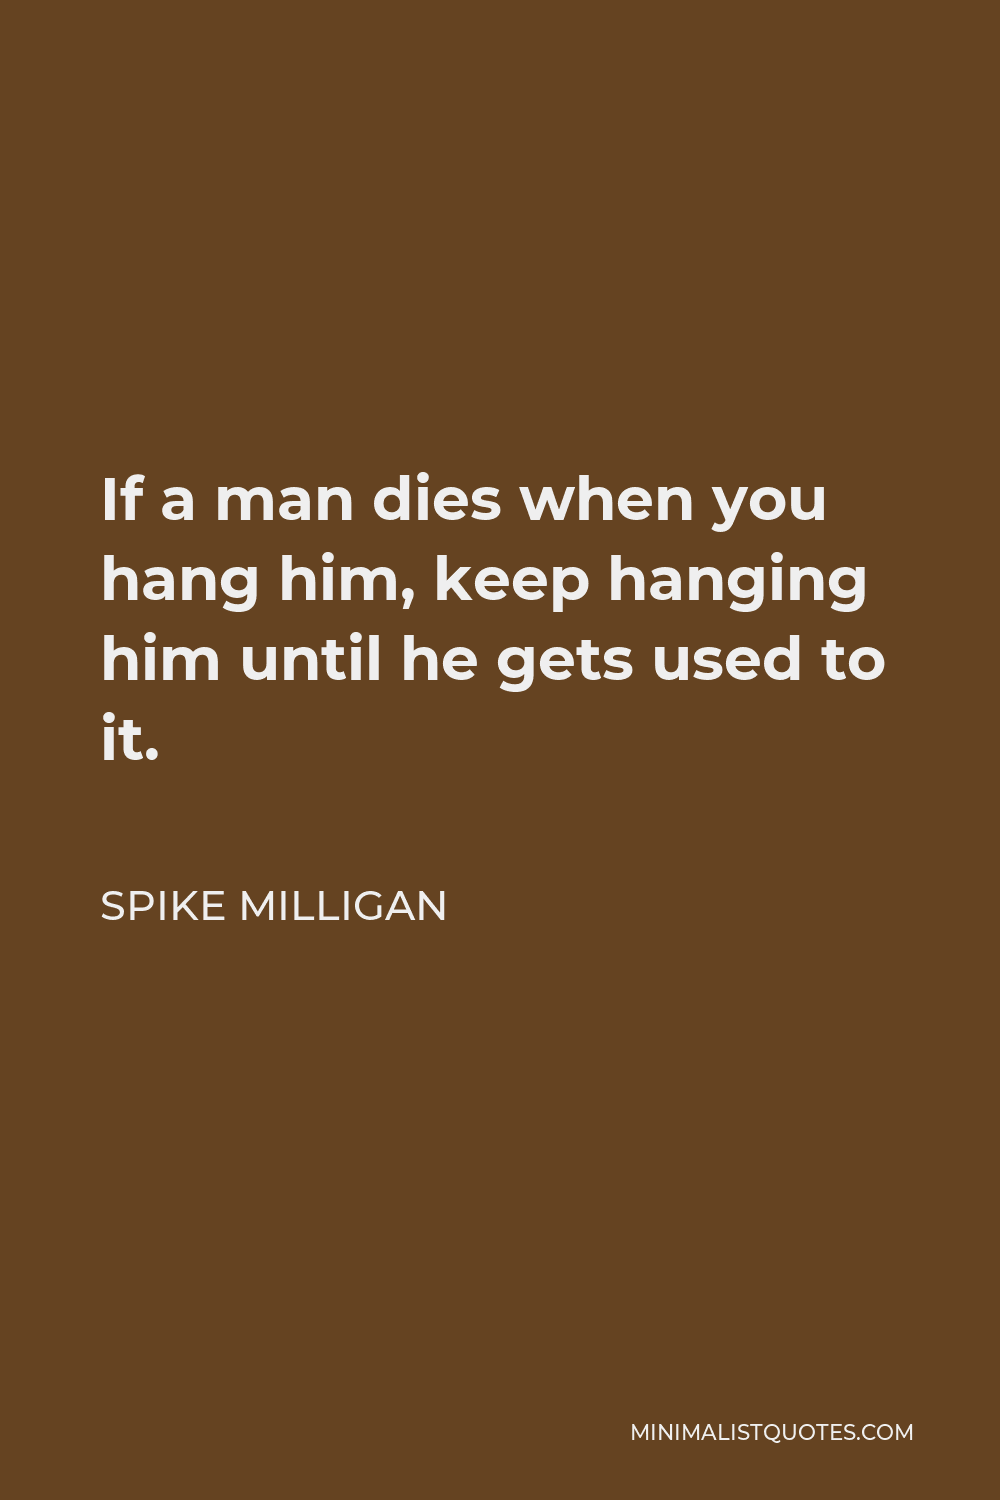 Spike Milligan Quote - If a man dies when you hang him, keep hanging him until he gets used to it.